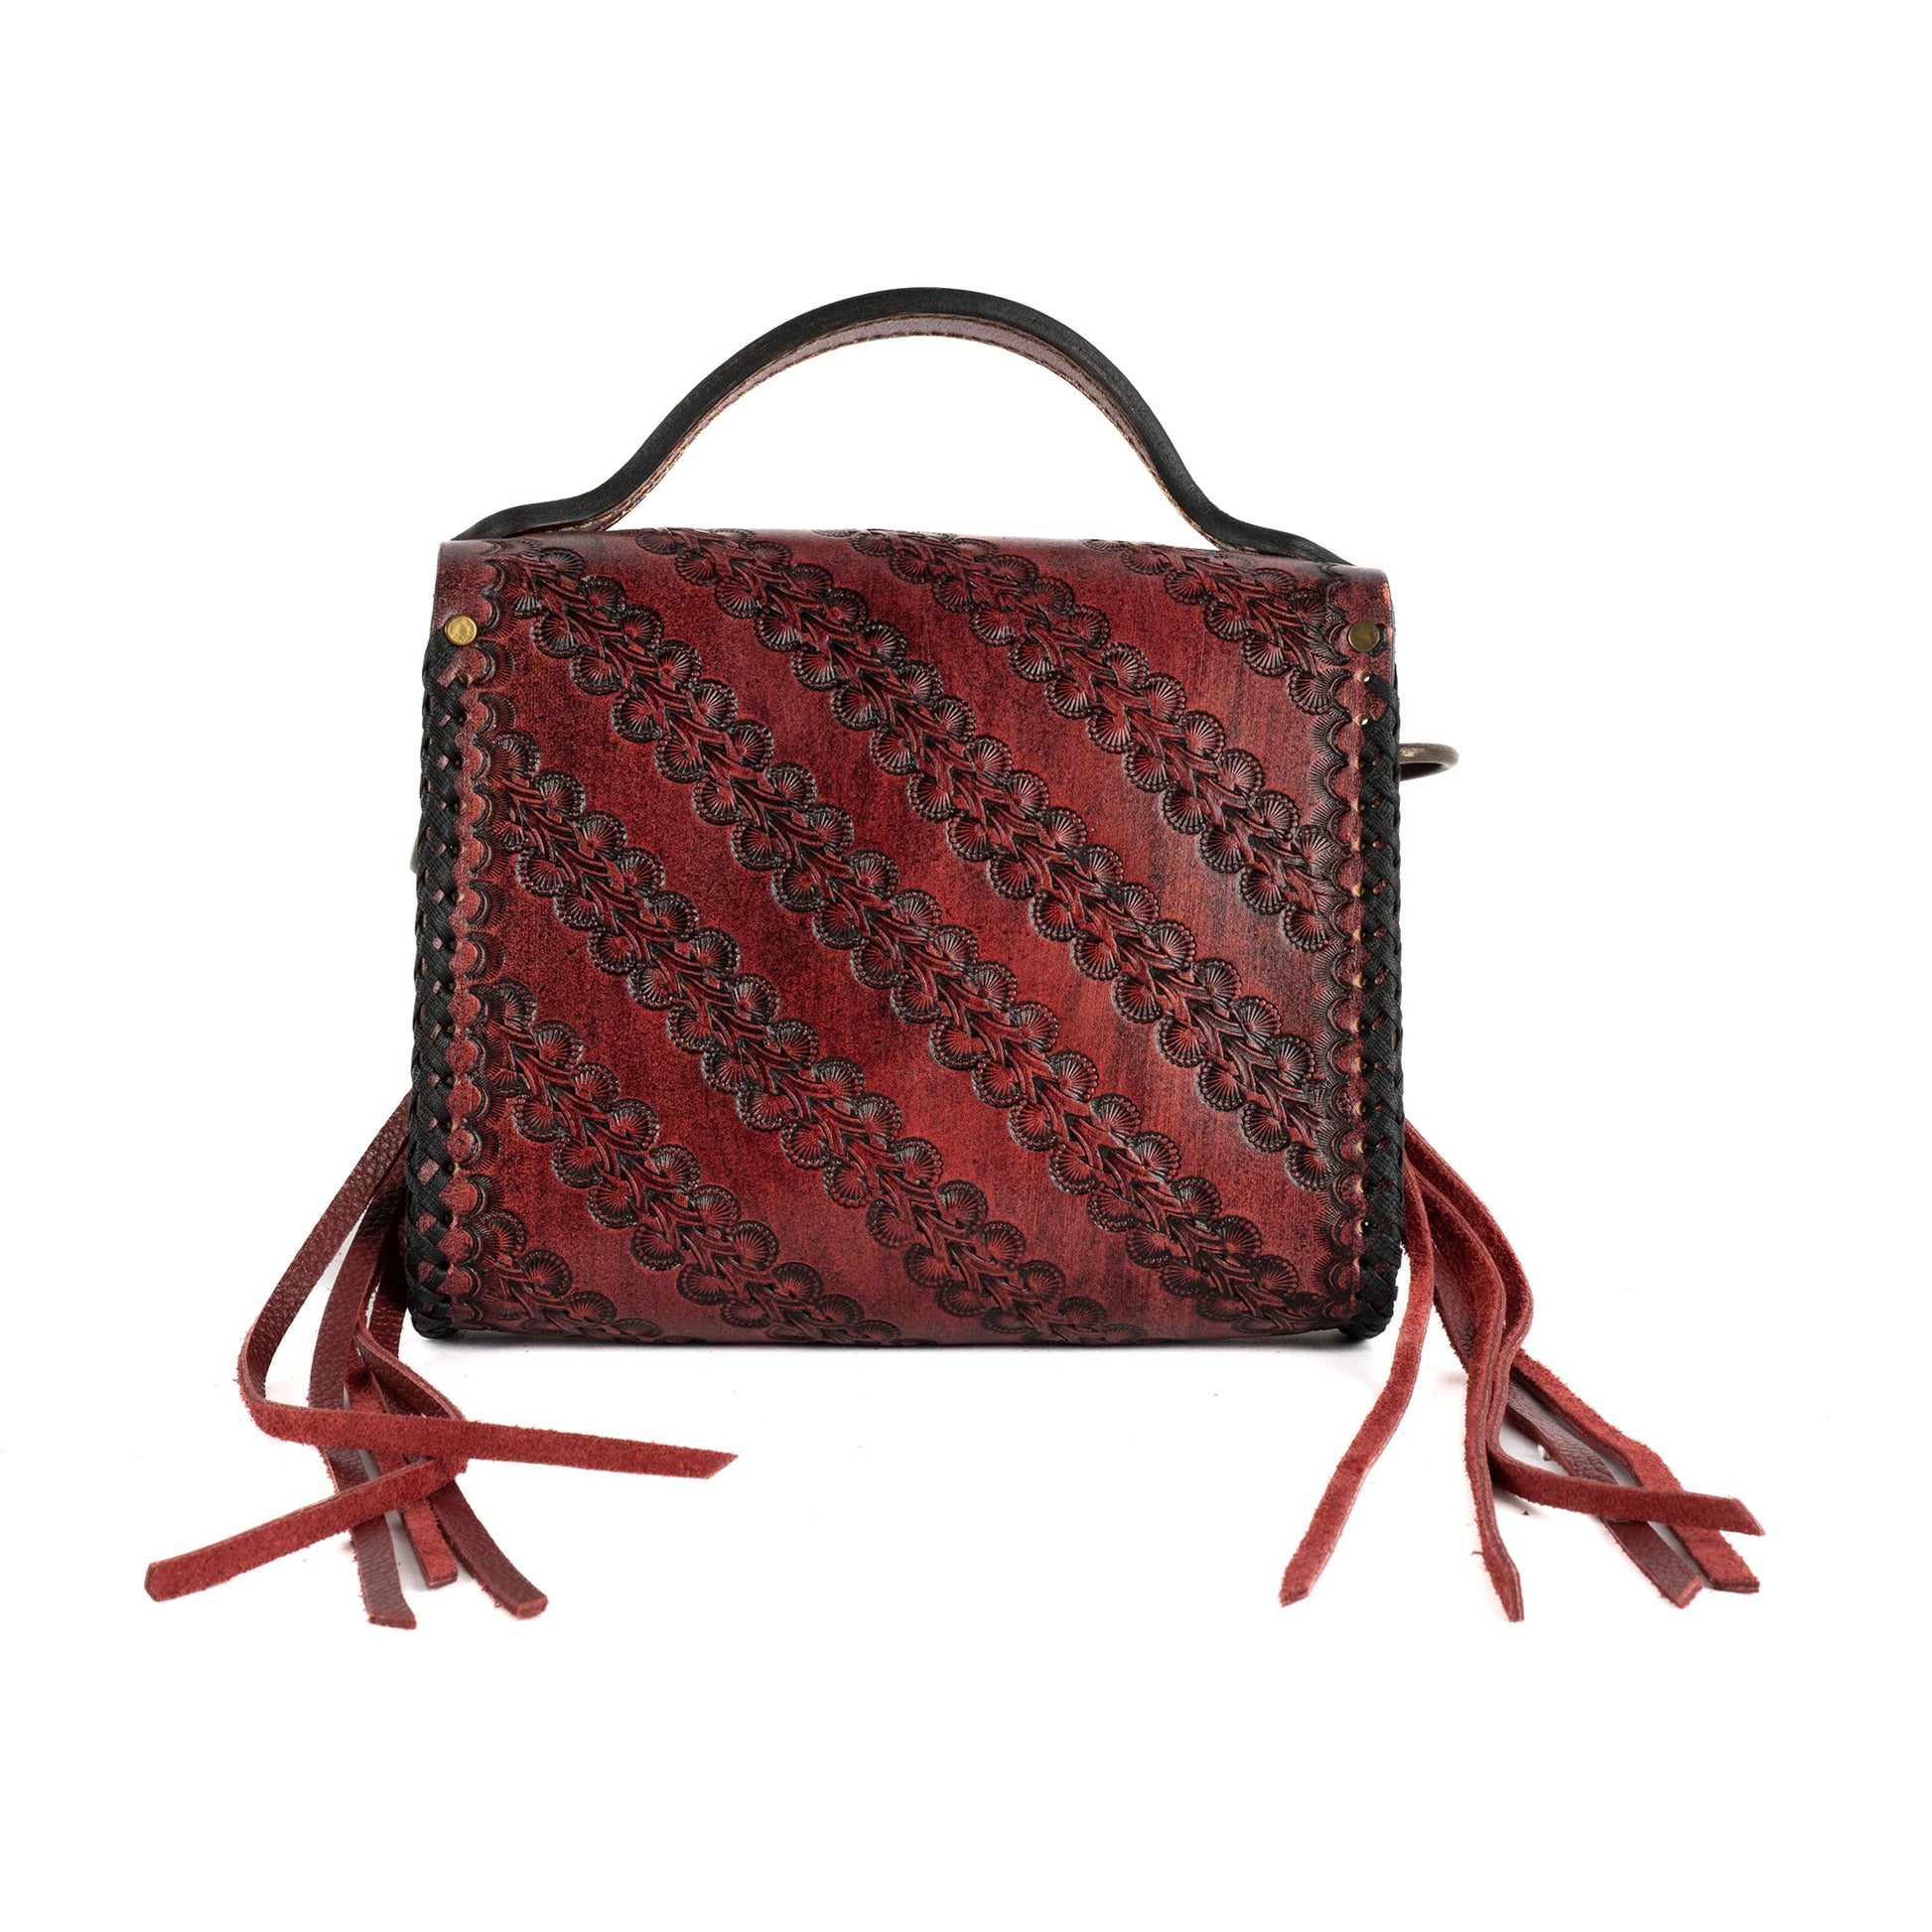 Victoria Red Leather Carved & Crafted Hand Bag